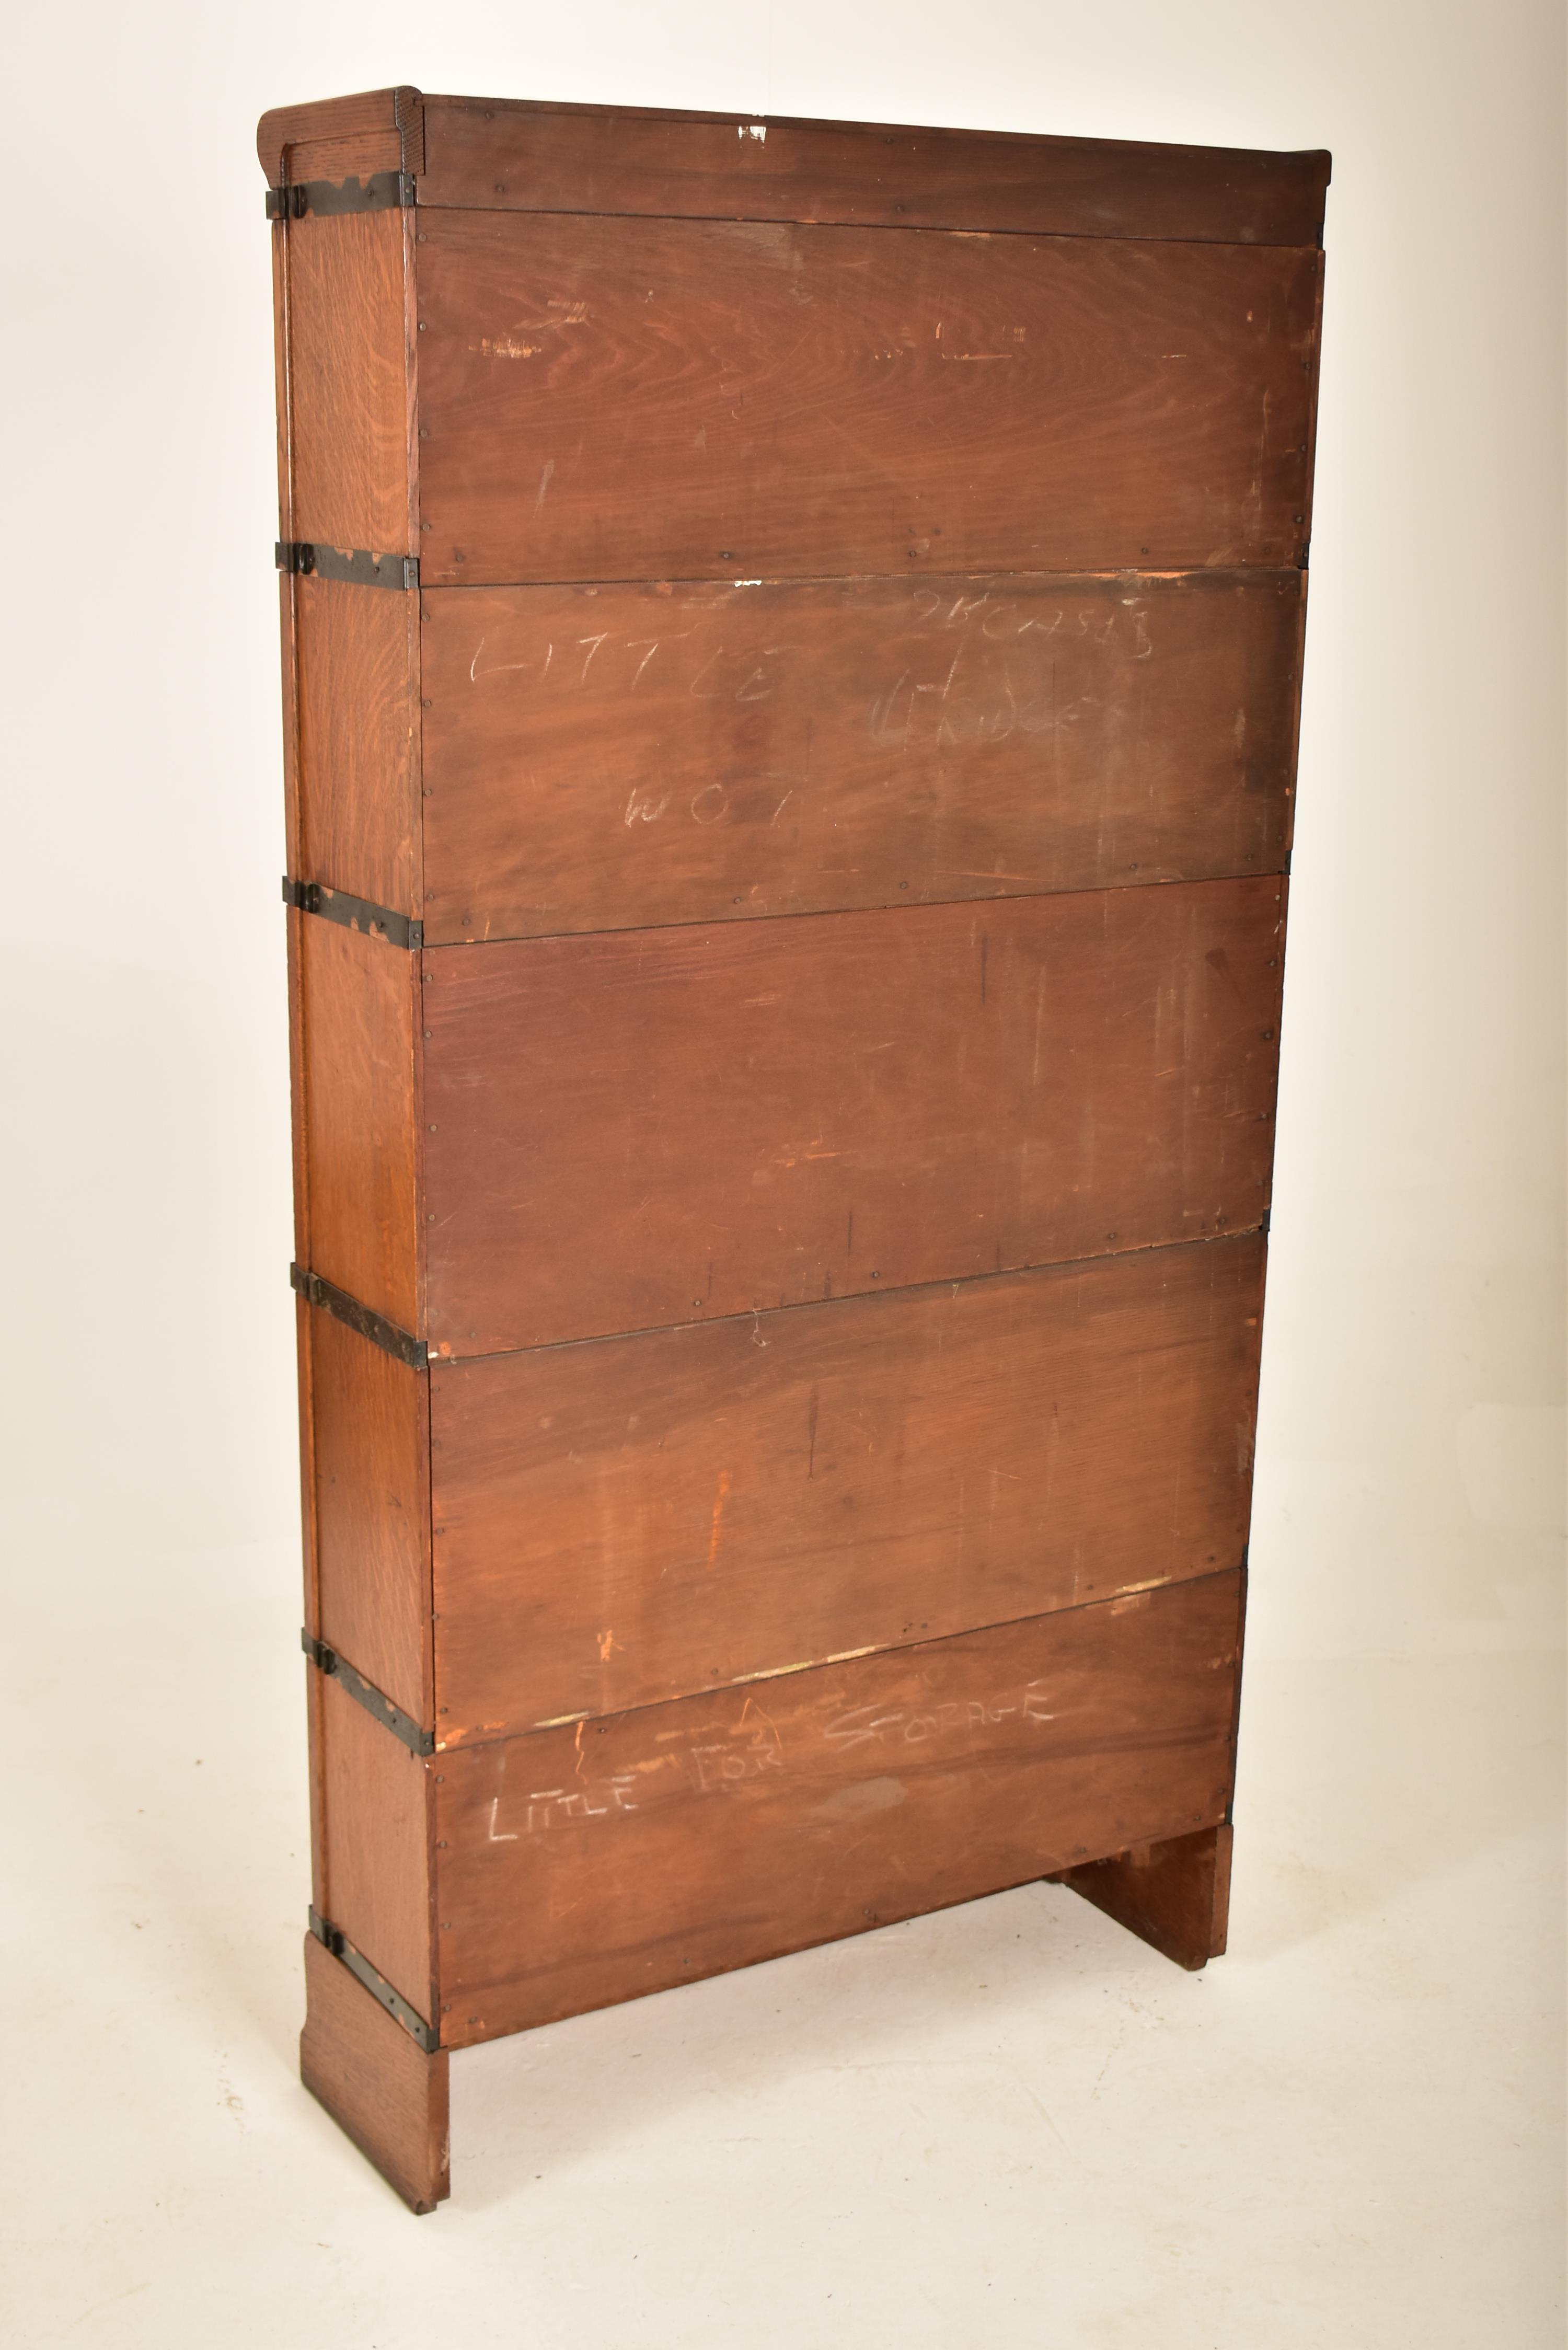 EARLY 20TH CENTURY GLOBE WERNICKE LAWYERS BOOKCASE - Image 5 of 5